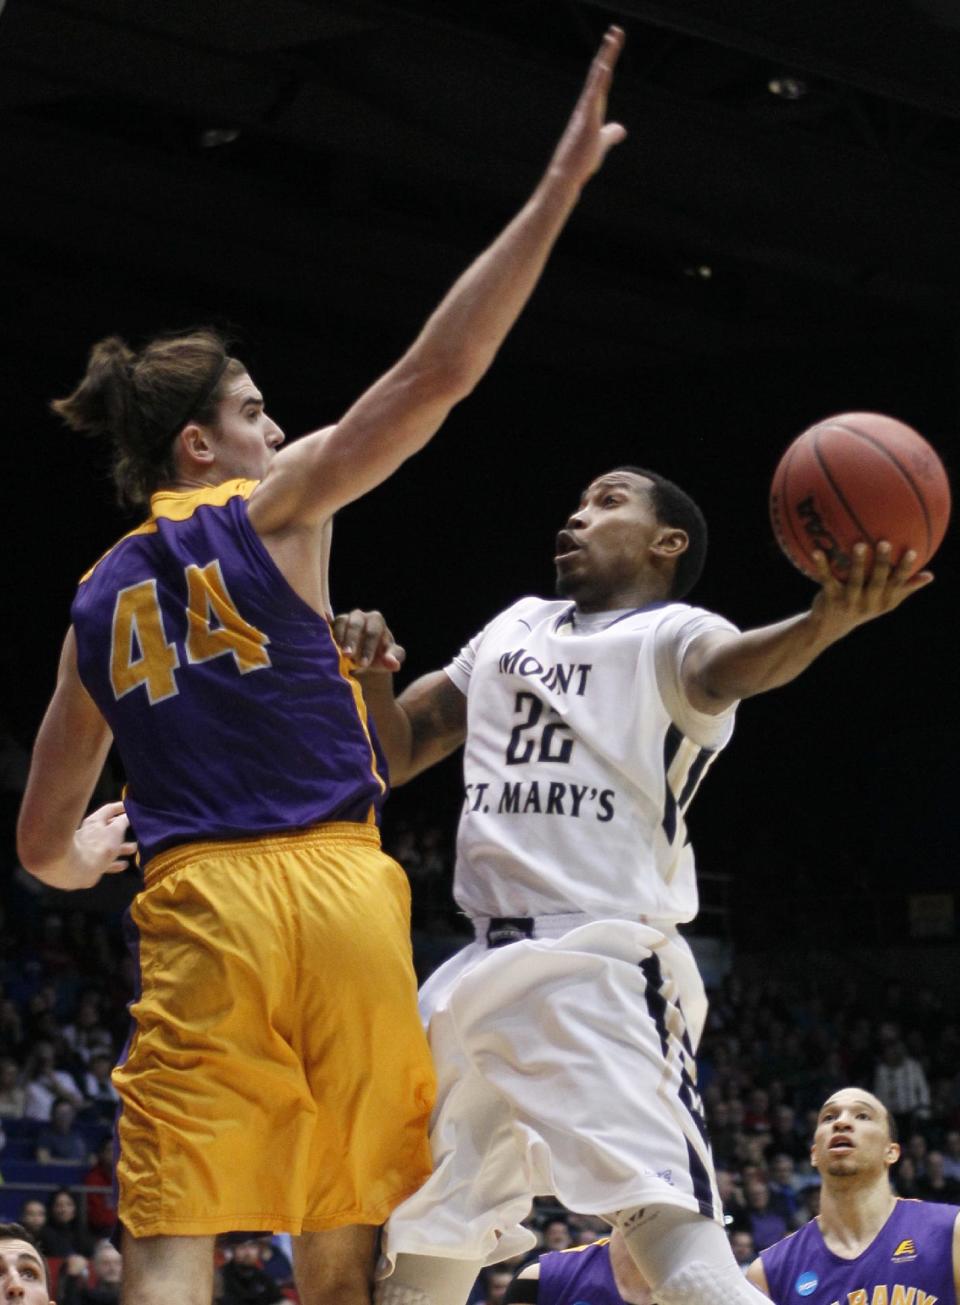 Mount St. Mary's guard Rashad Whack (22) drives against Albany center John Puk (44) during the first half of a first-round game of the NCAA college basketball tournament, Tuesday, March 18, 2014, in Dayton, Ohio. (AP Photo/Skip Peterson)